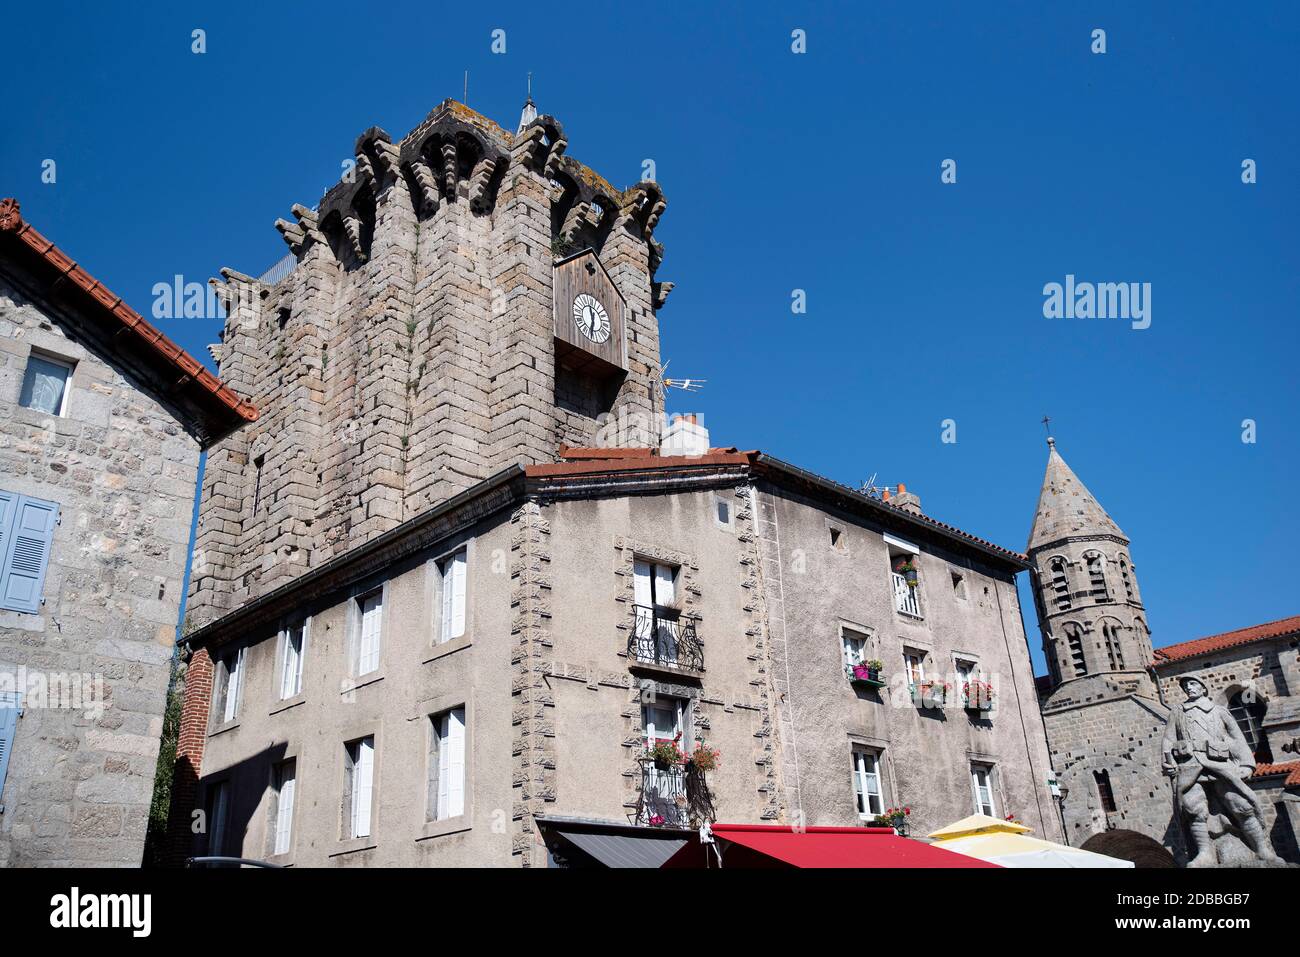 Picturesque town of Saugues in Auvergne, France Stock Photo